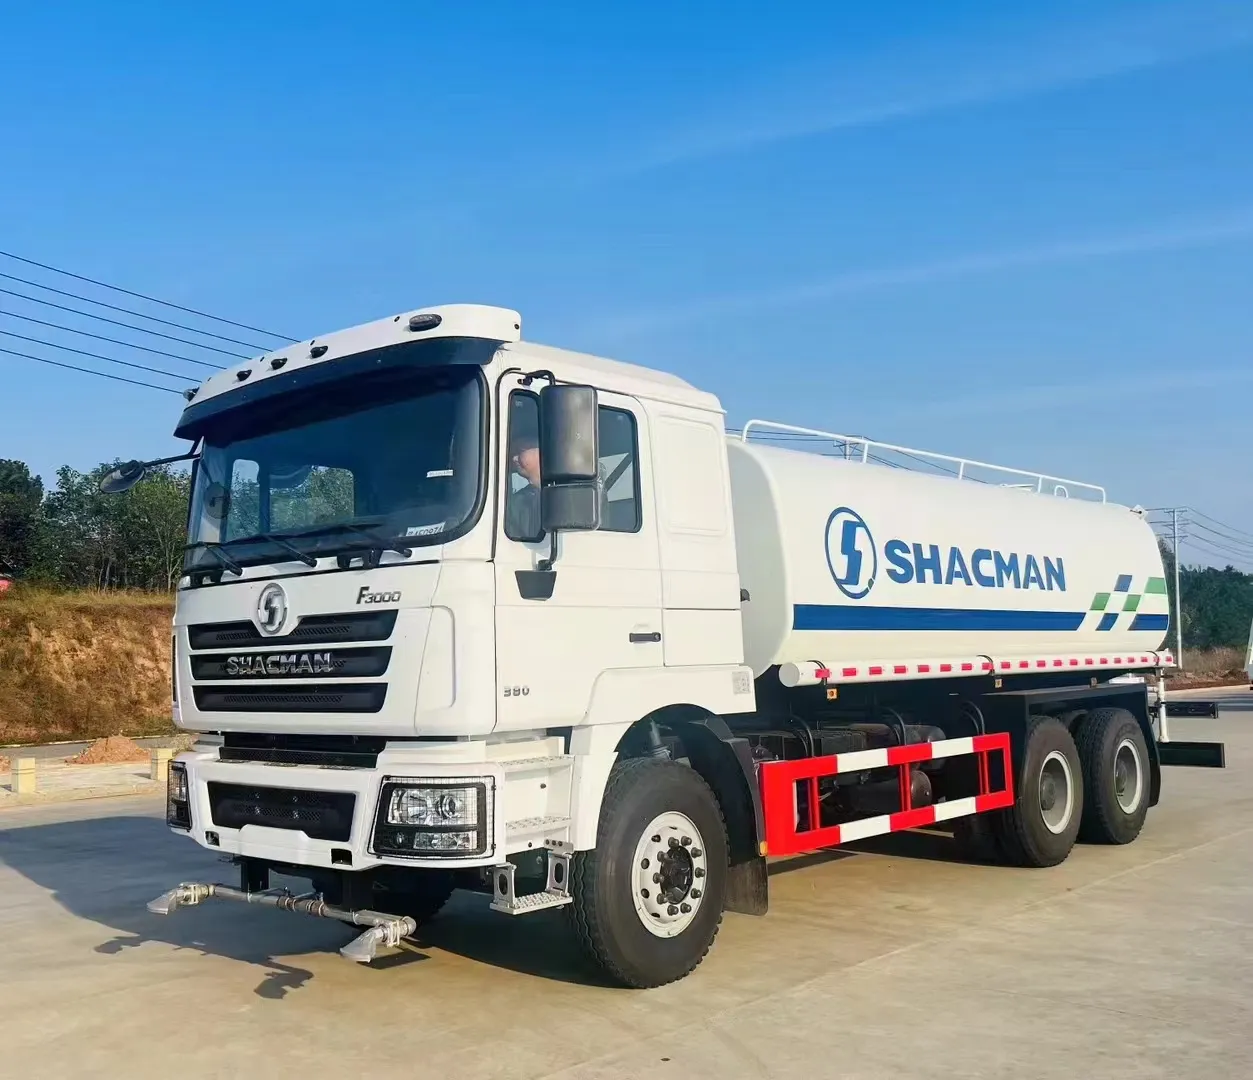 SHACMAN F3000 water bowser truck Fire Sprinkler Water Truck